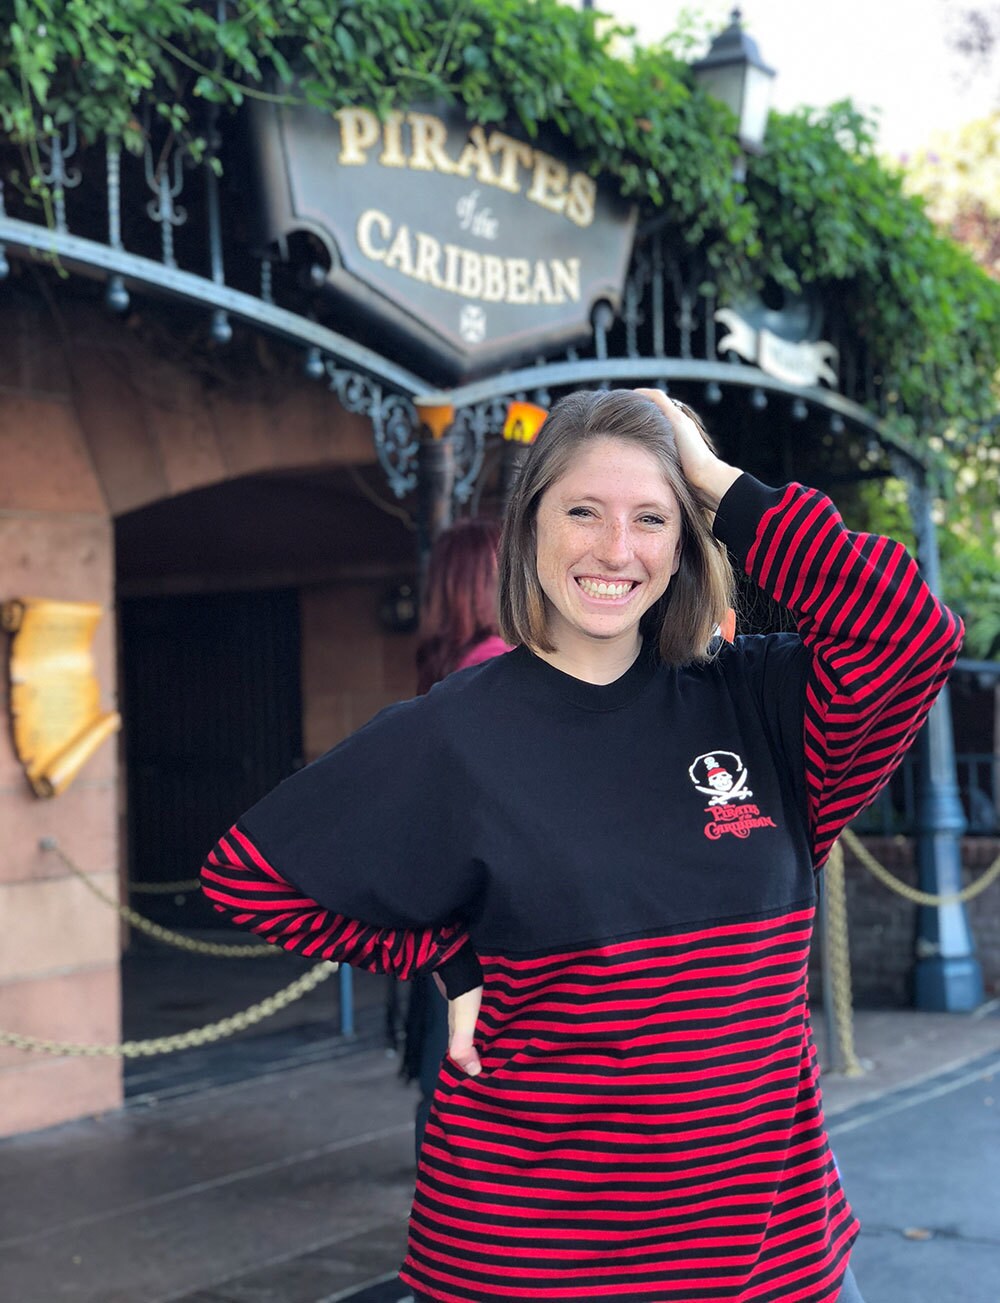 Model wearing black and red striped 'Pirates of the Caribbean' Spirit Jersey